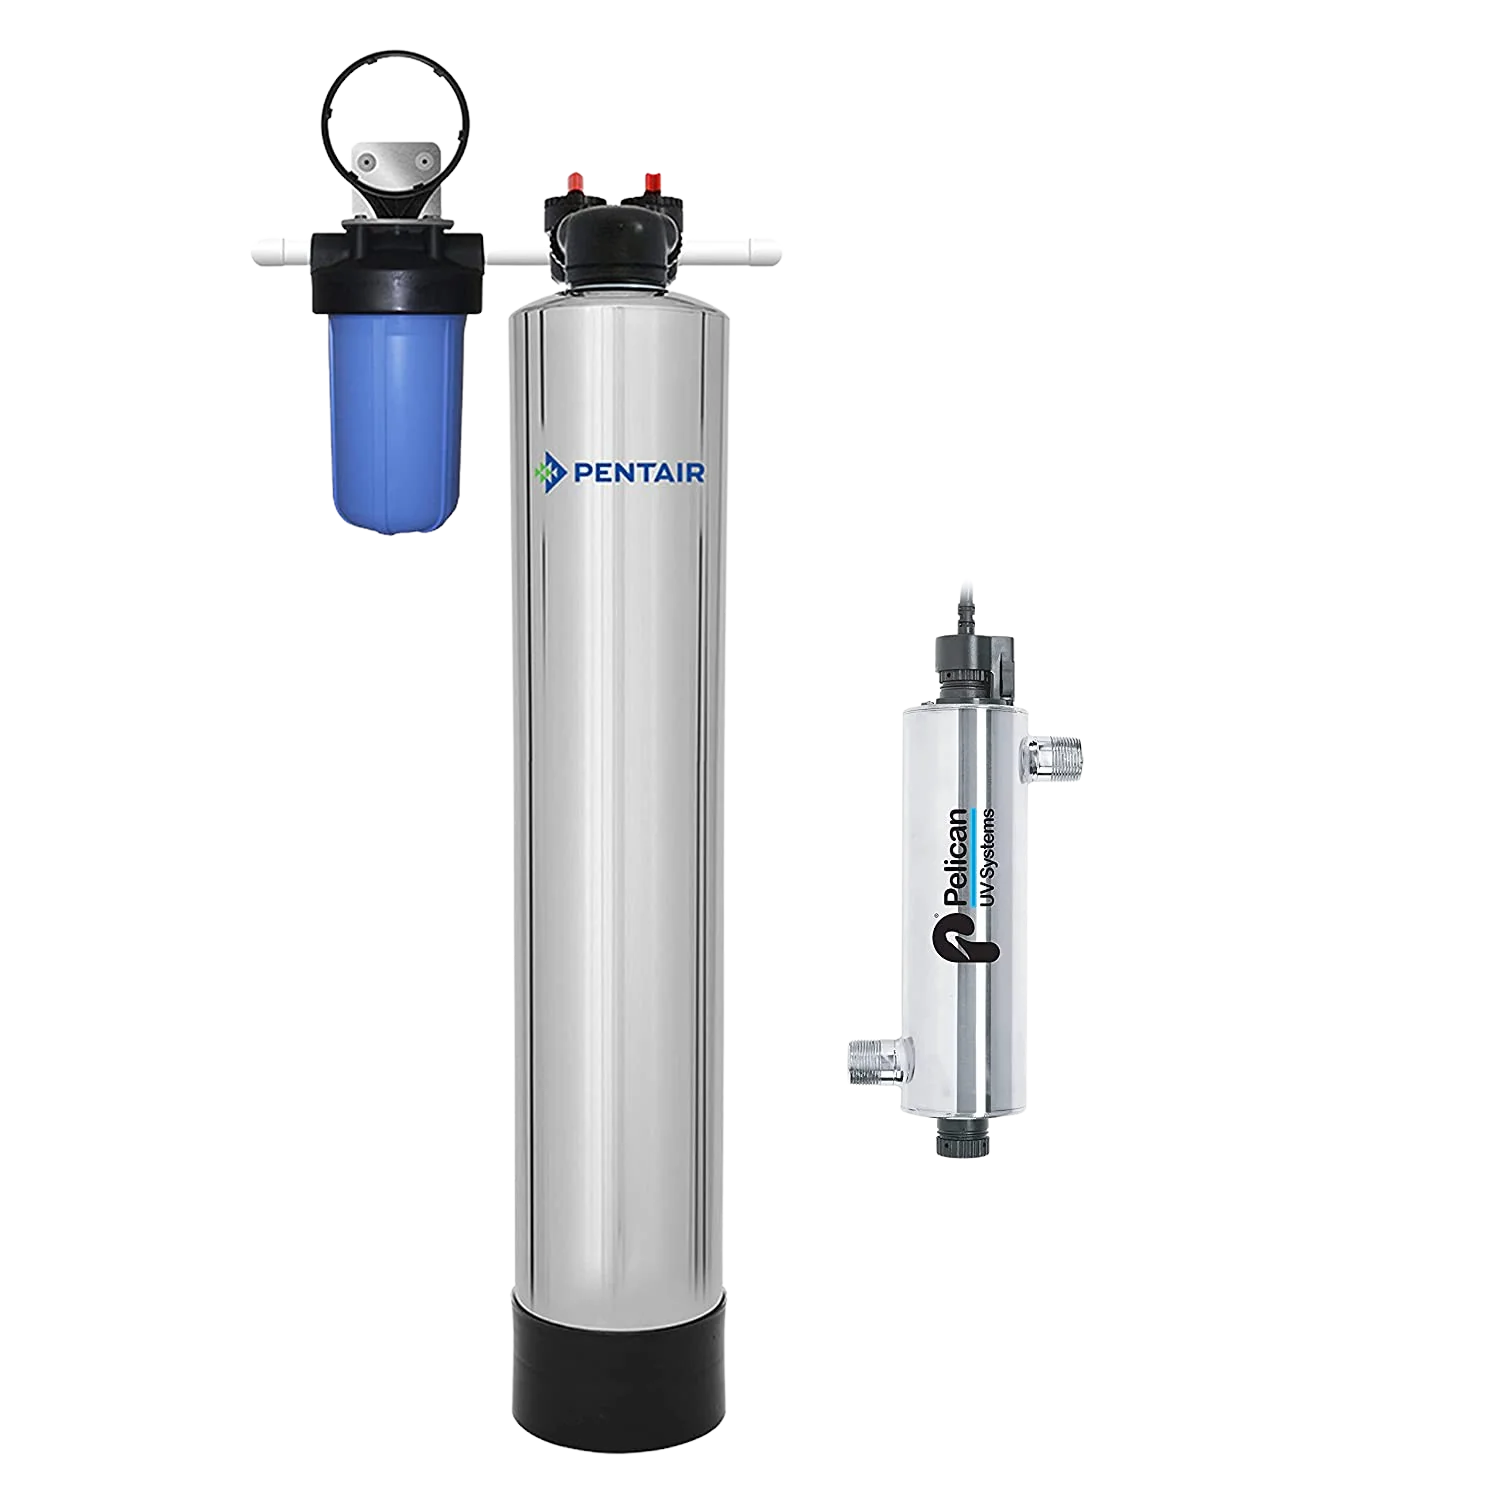 PC600-PUV-7-P Pelican Whole House Water Filters Uv Systems, 1-3 Bathrooms | 12 Months UV Lamp Life